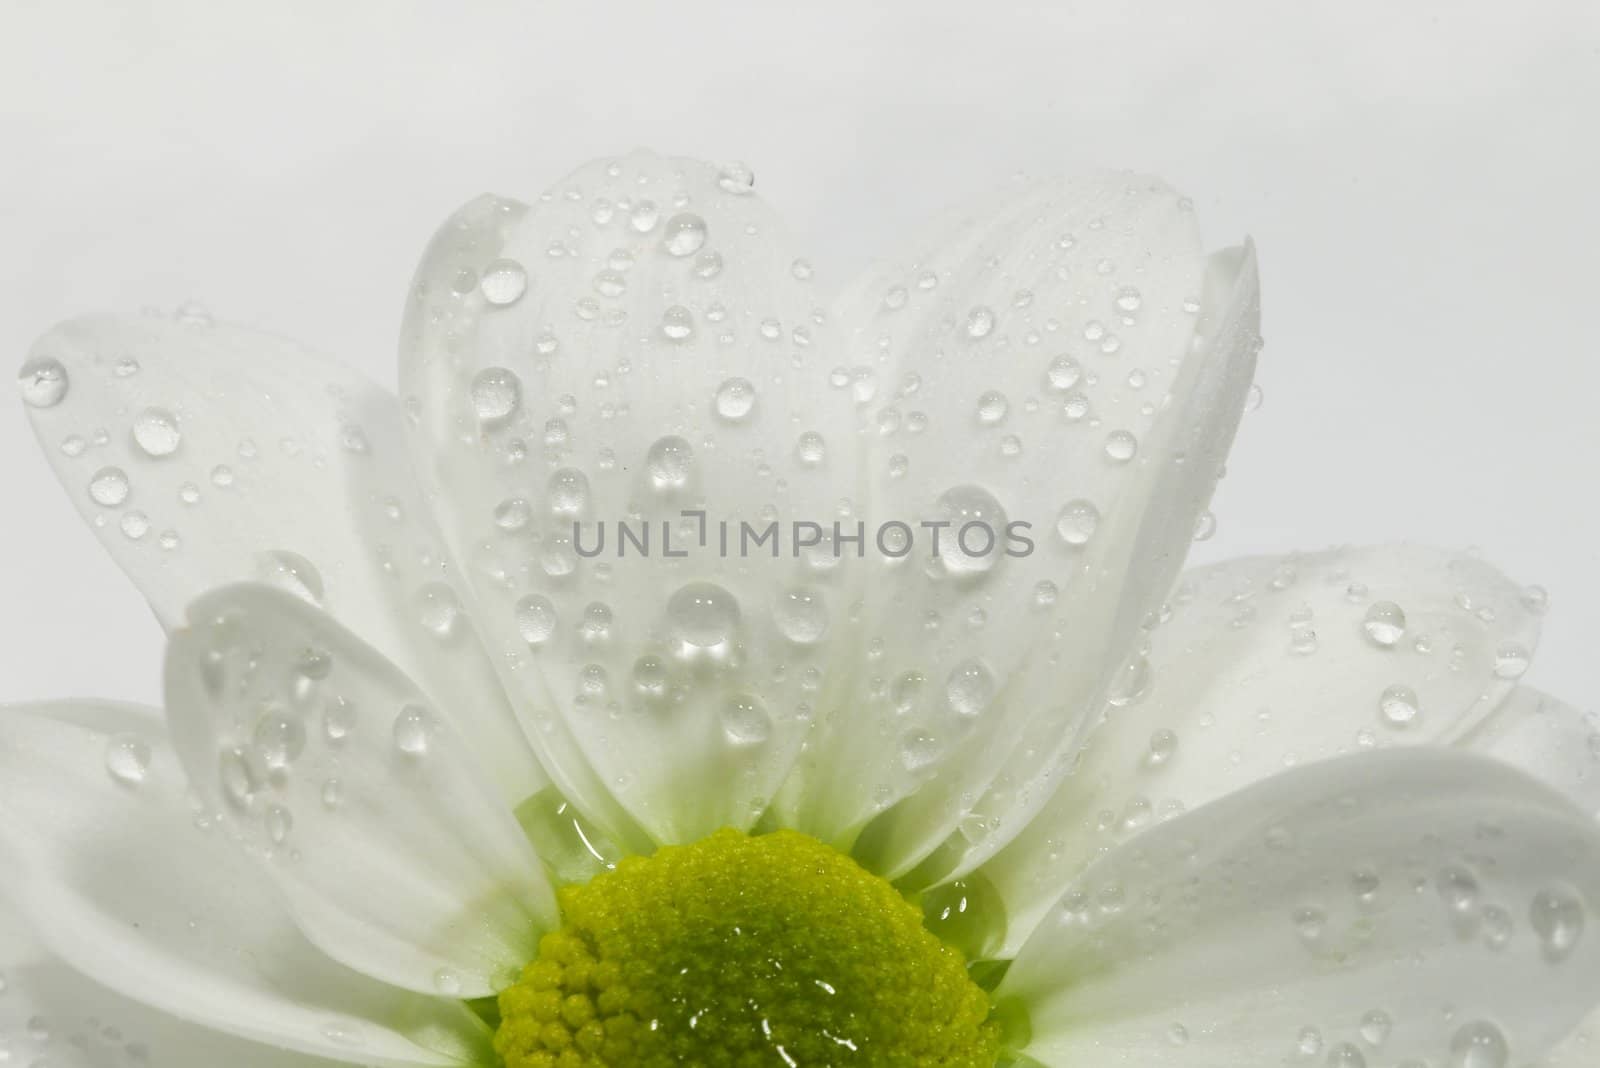 Close up of a daisy flower, isolated on white,
